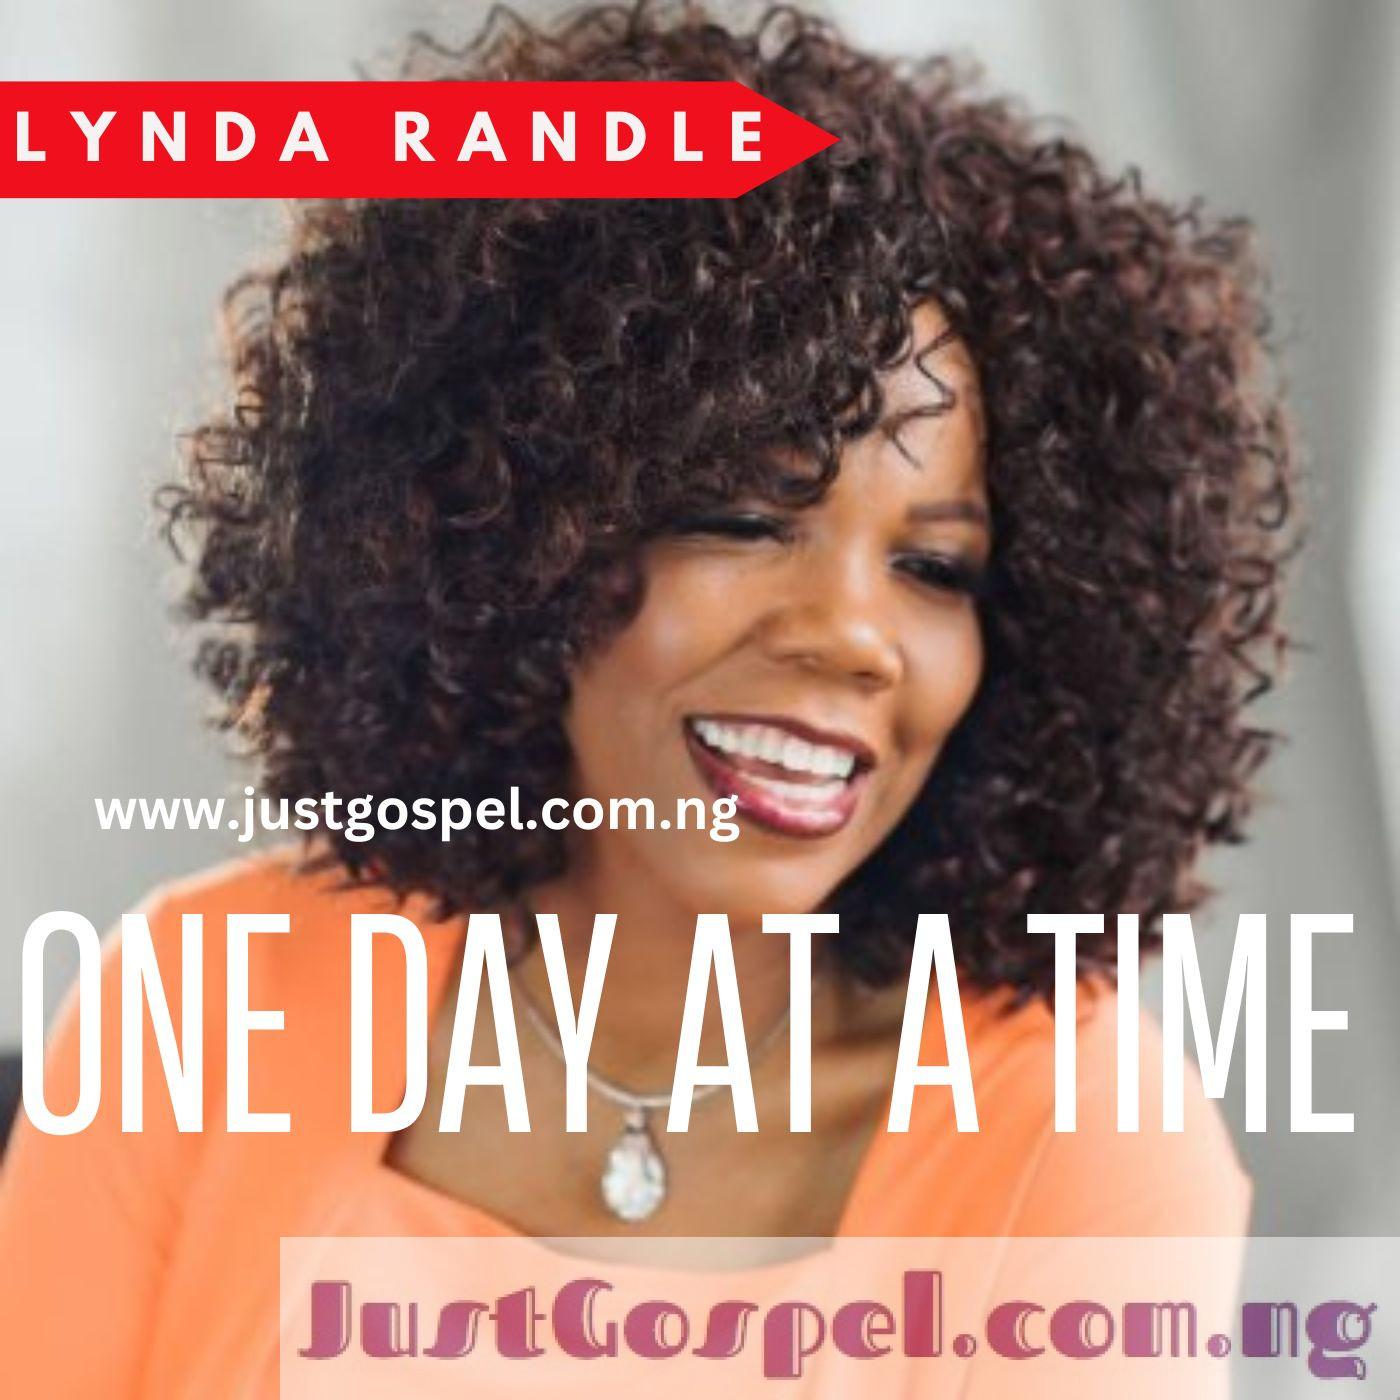 Lynda Randle – One Day At a Time